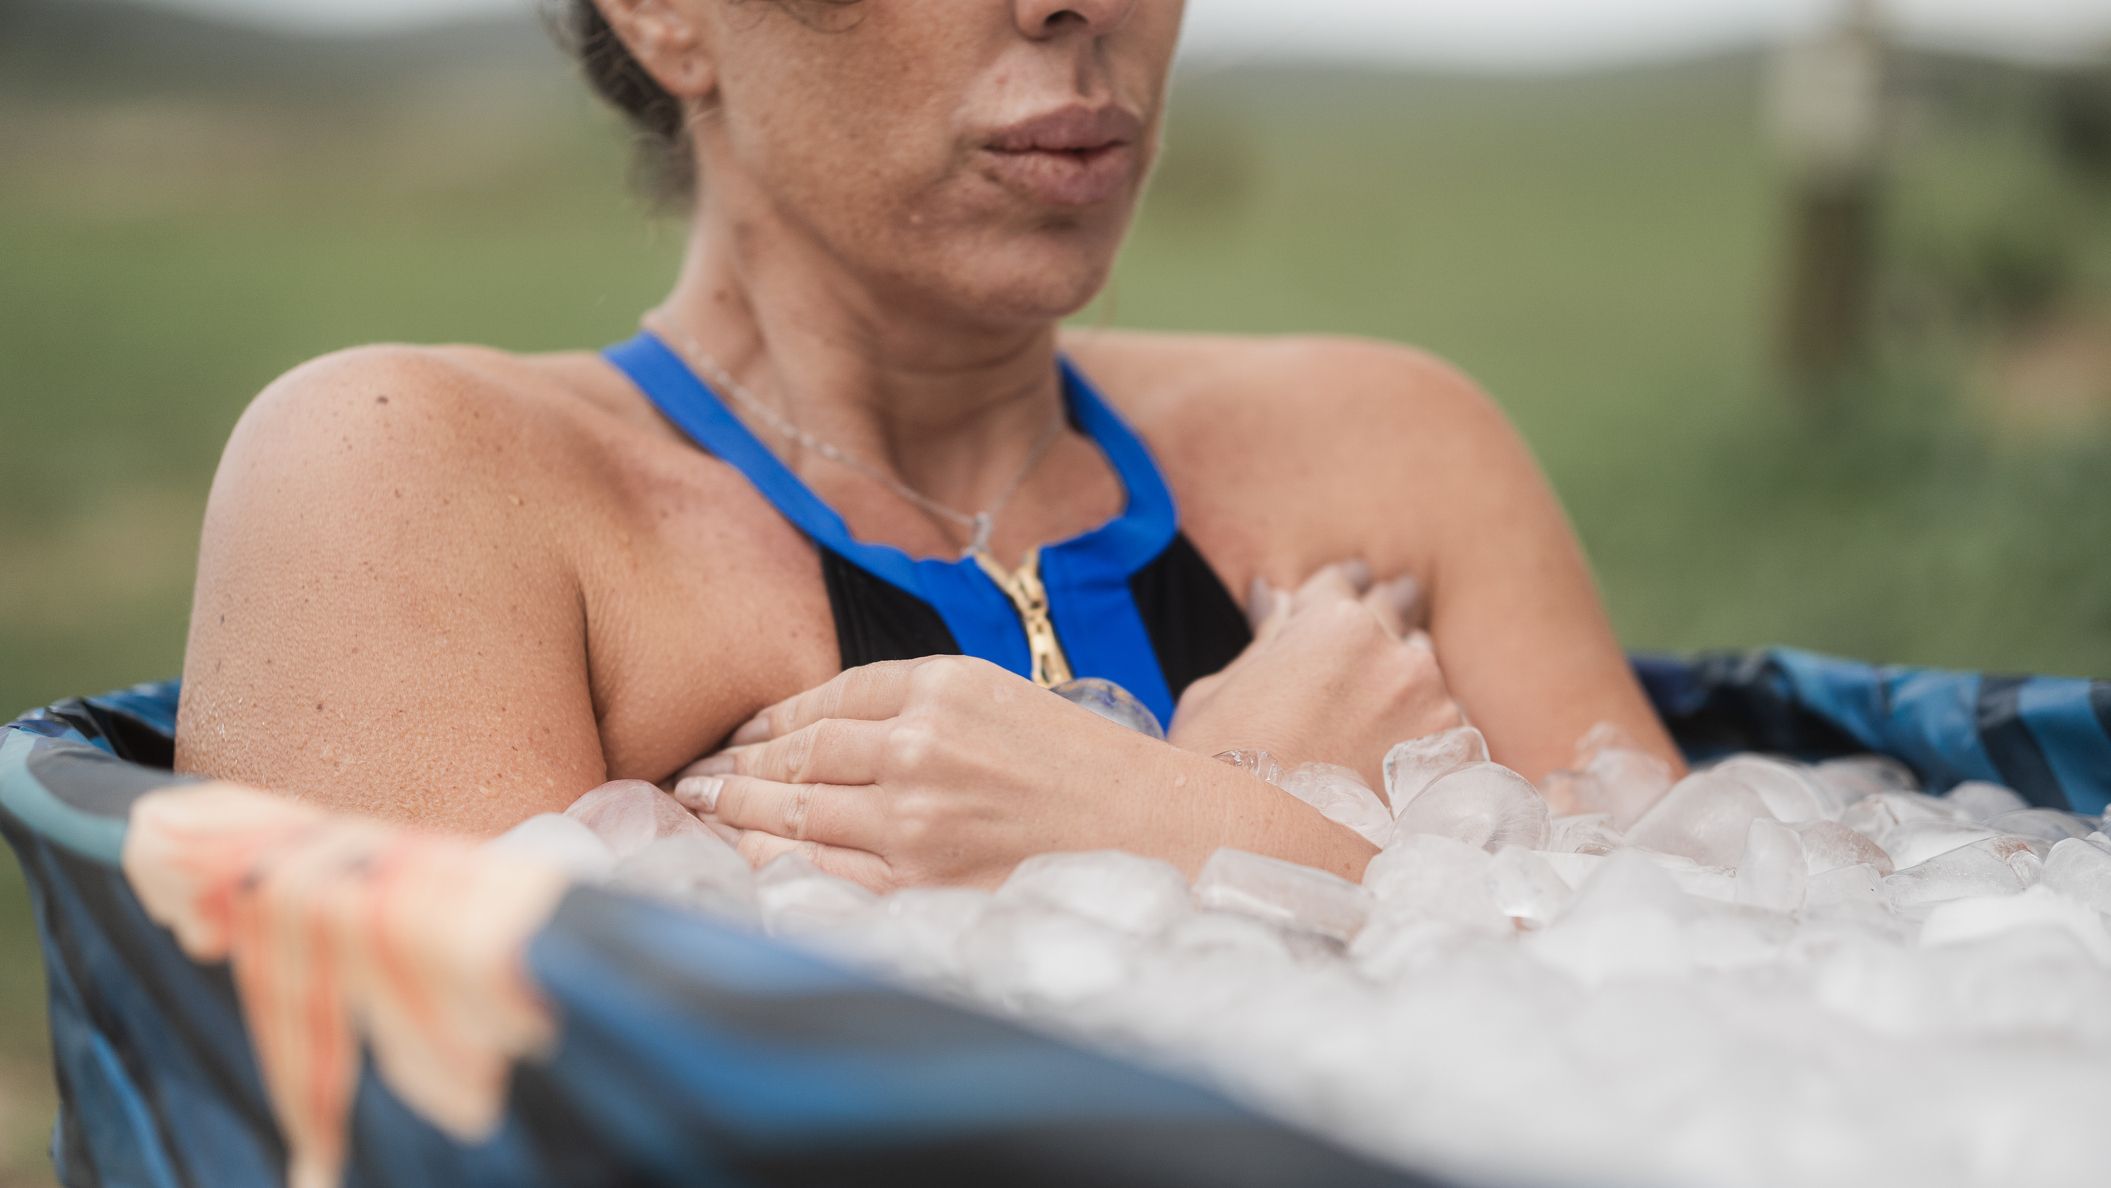 Can Cold Therapy Reduce Stress? We Look at the Evidence